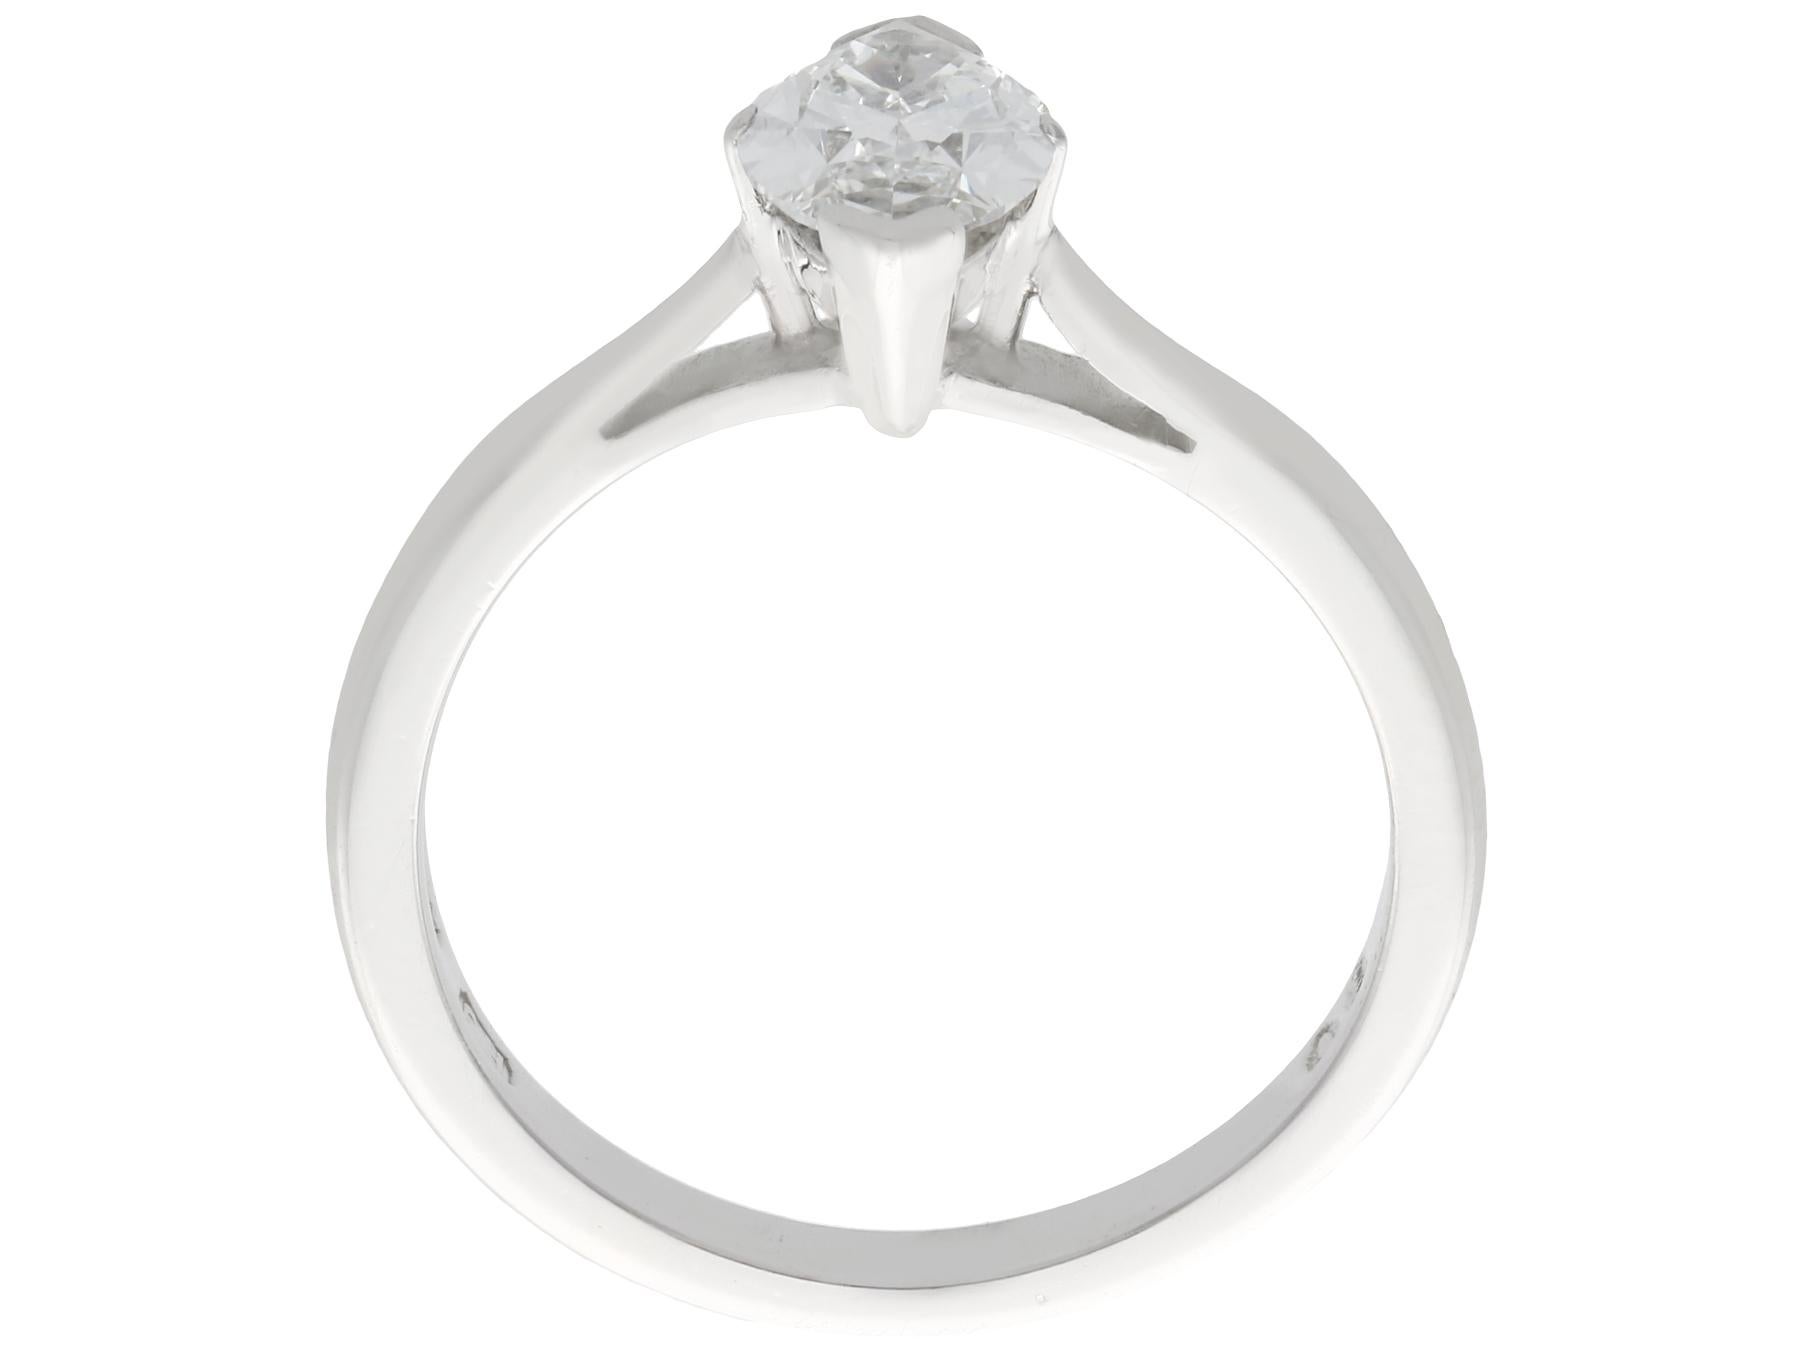 Marquise Diamond and Platinum Solitaire Engagement Ring In Excellent Condition For Sale In Jesmond, Newcastle Upon Tyne